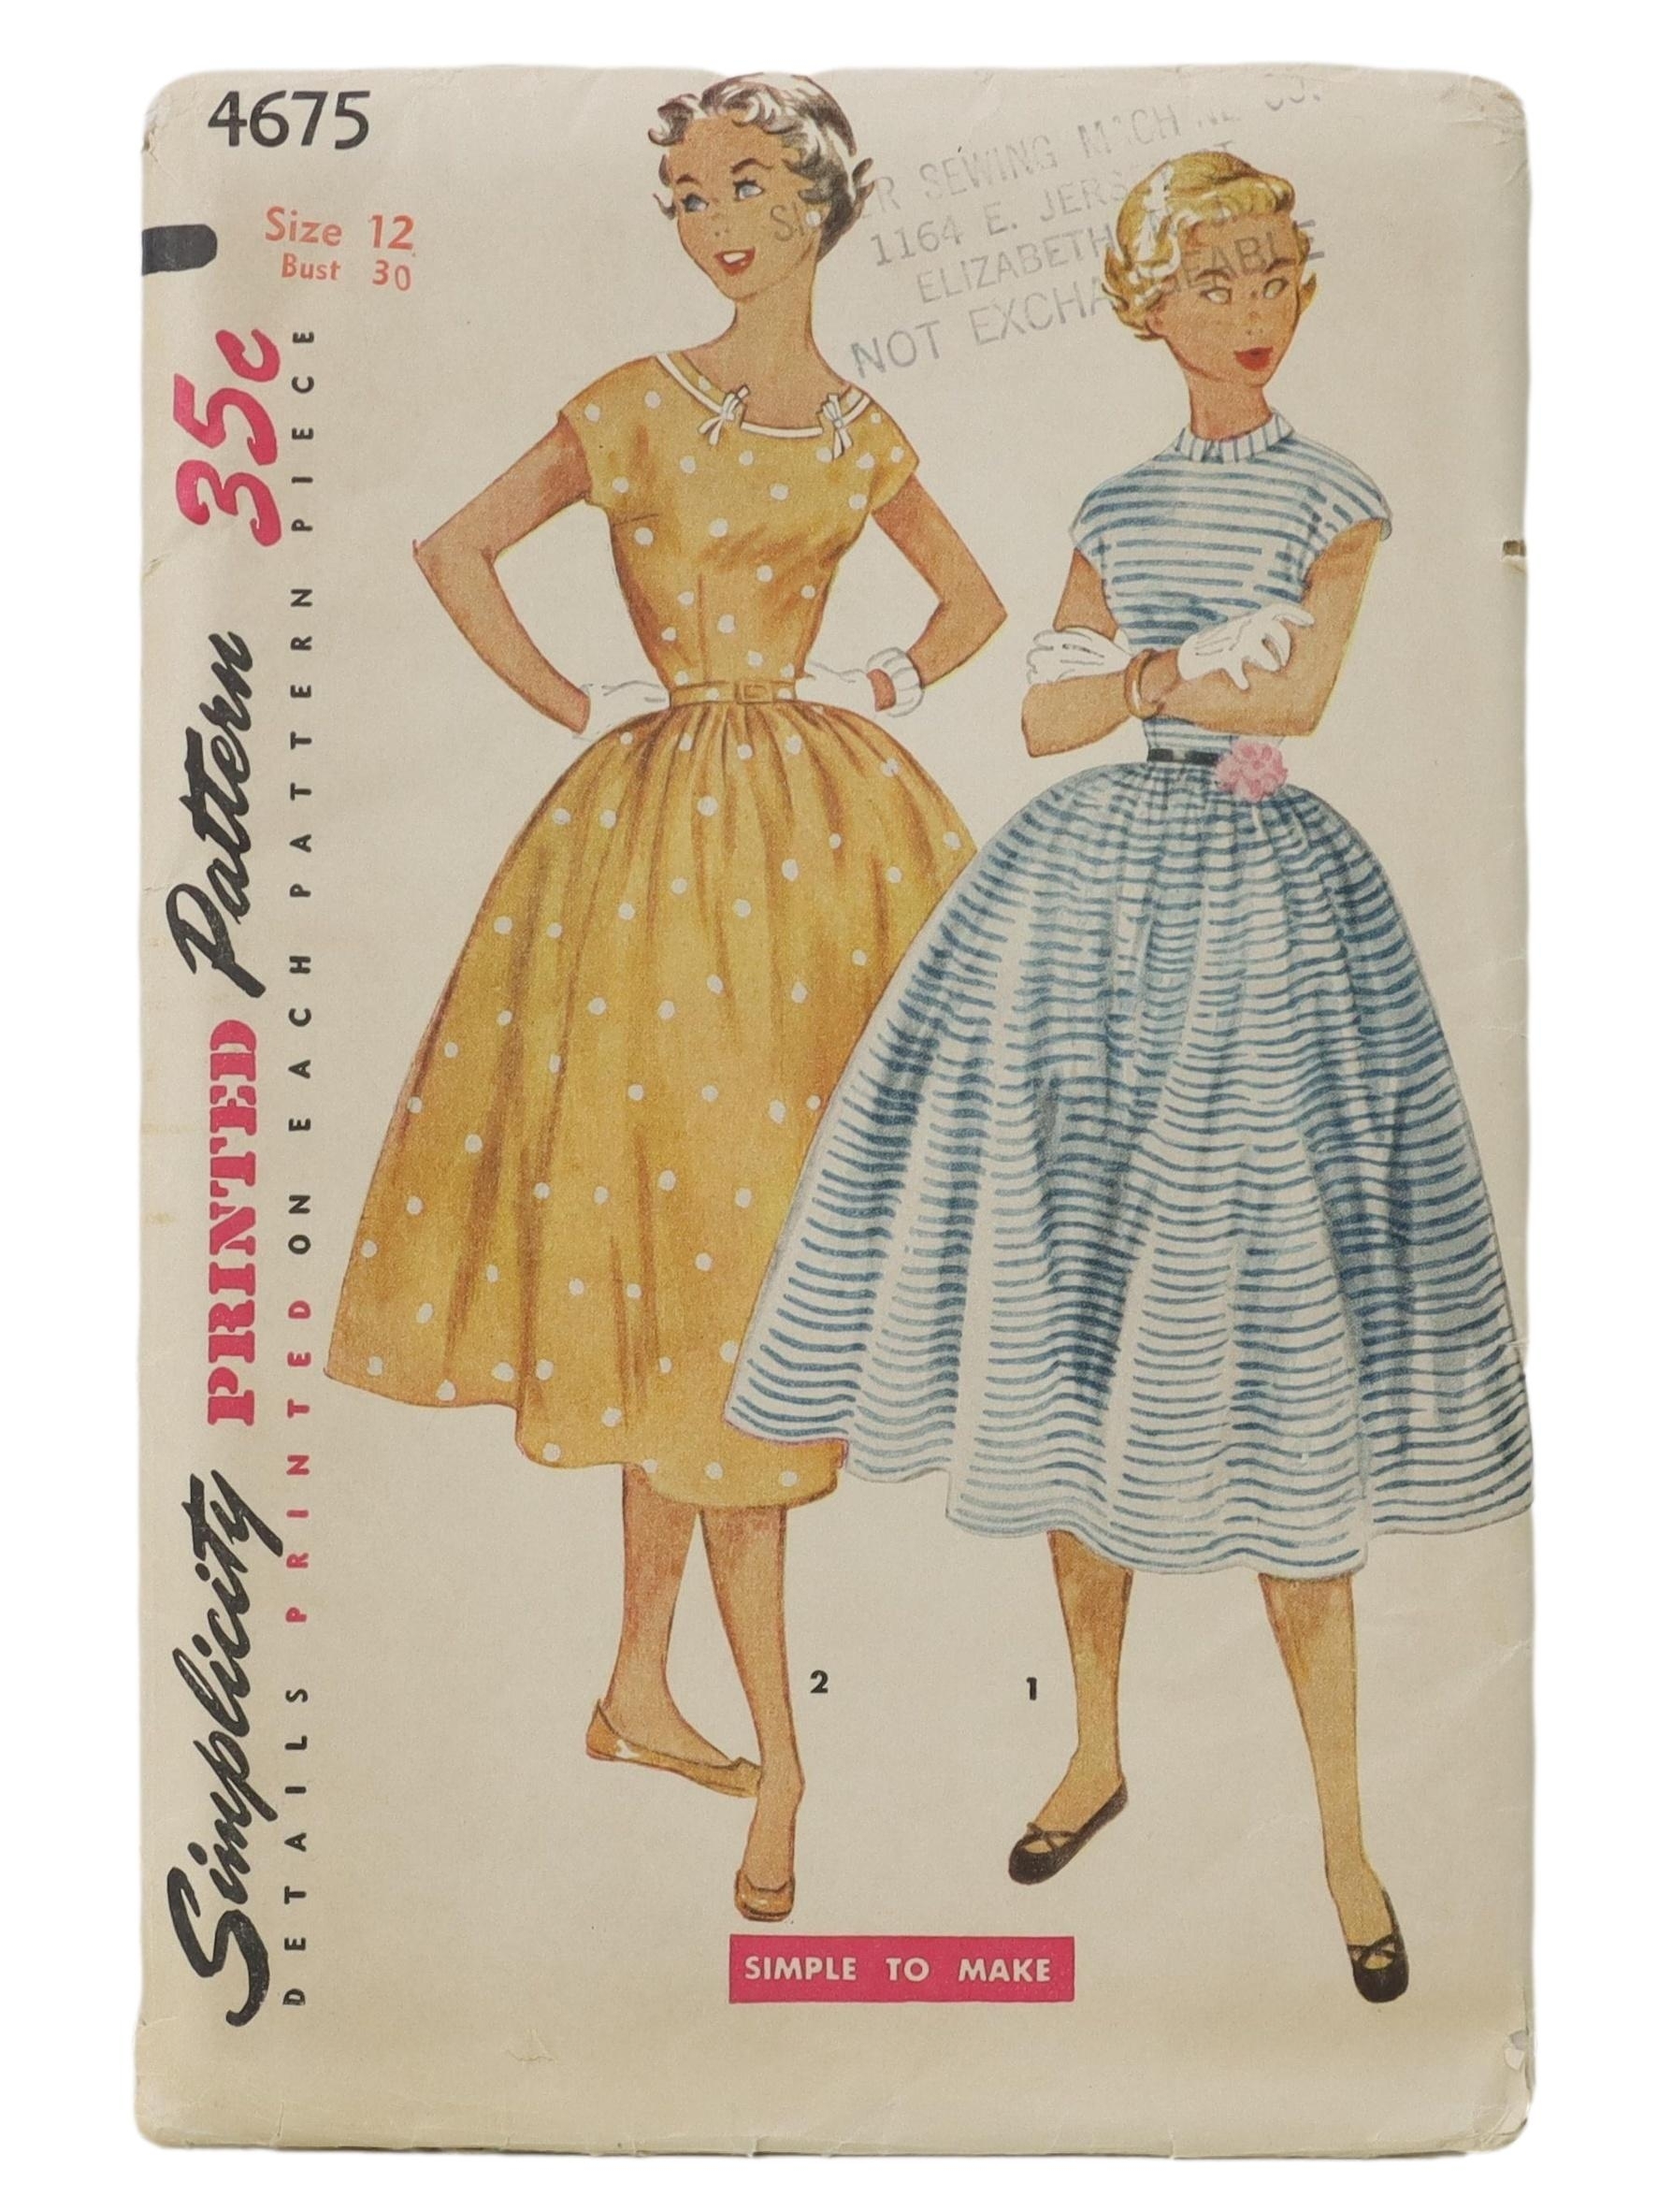 Retro Fifties Sewing Pattern: 50s -Simplicity Pattern No. 4675